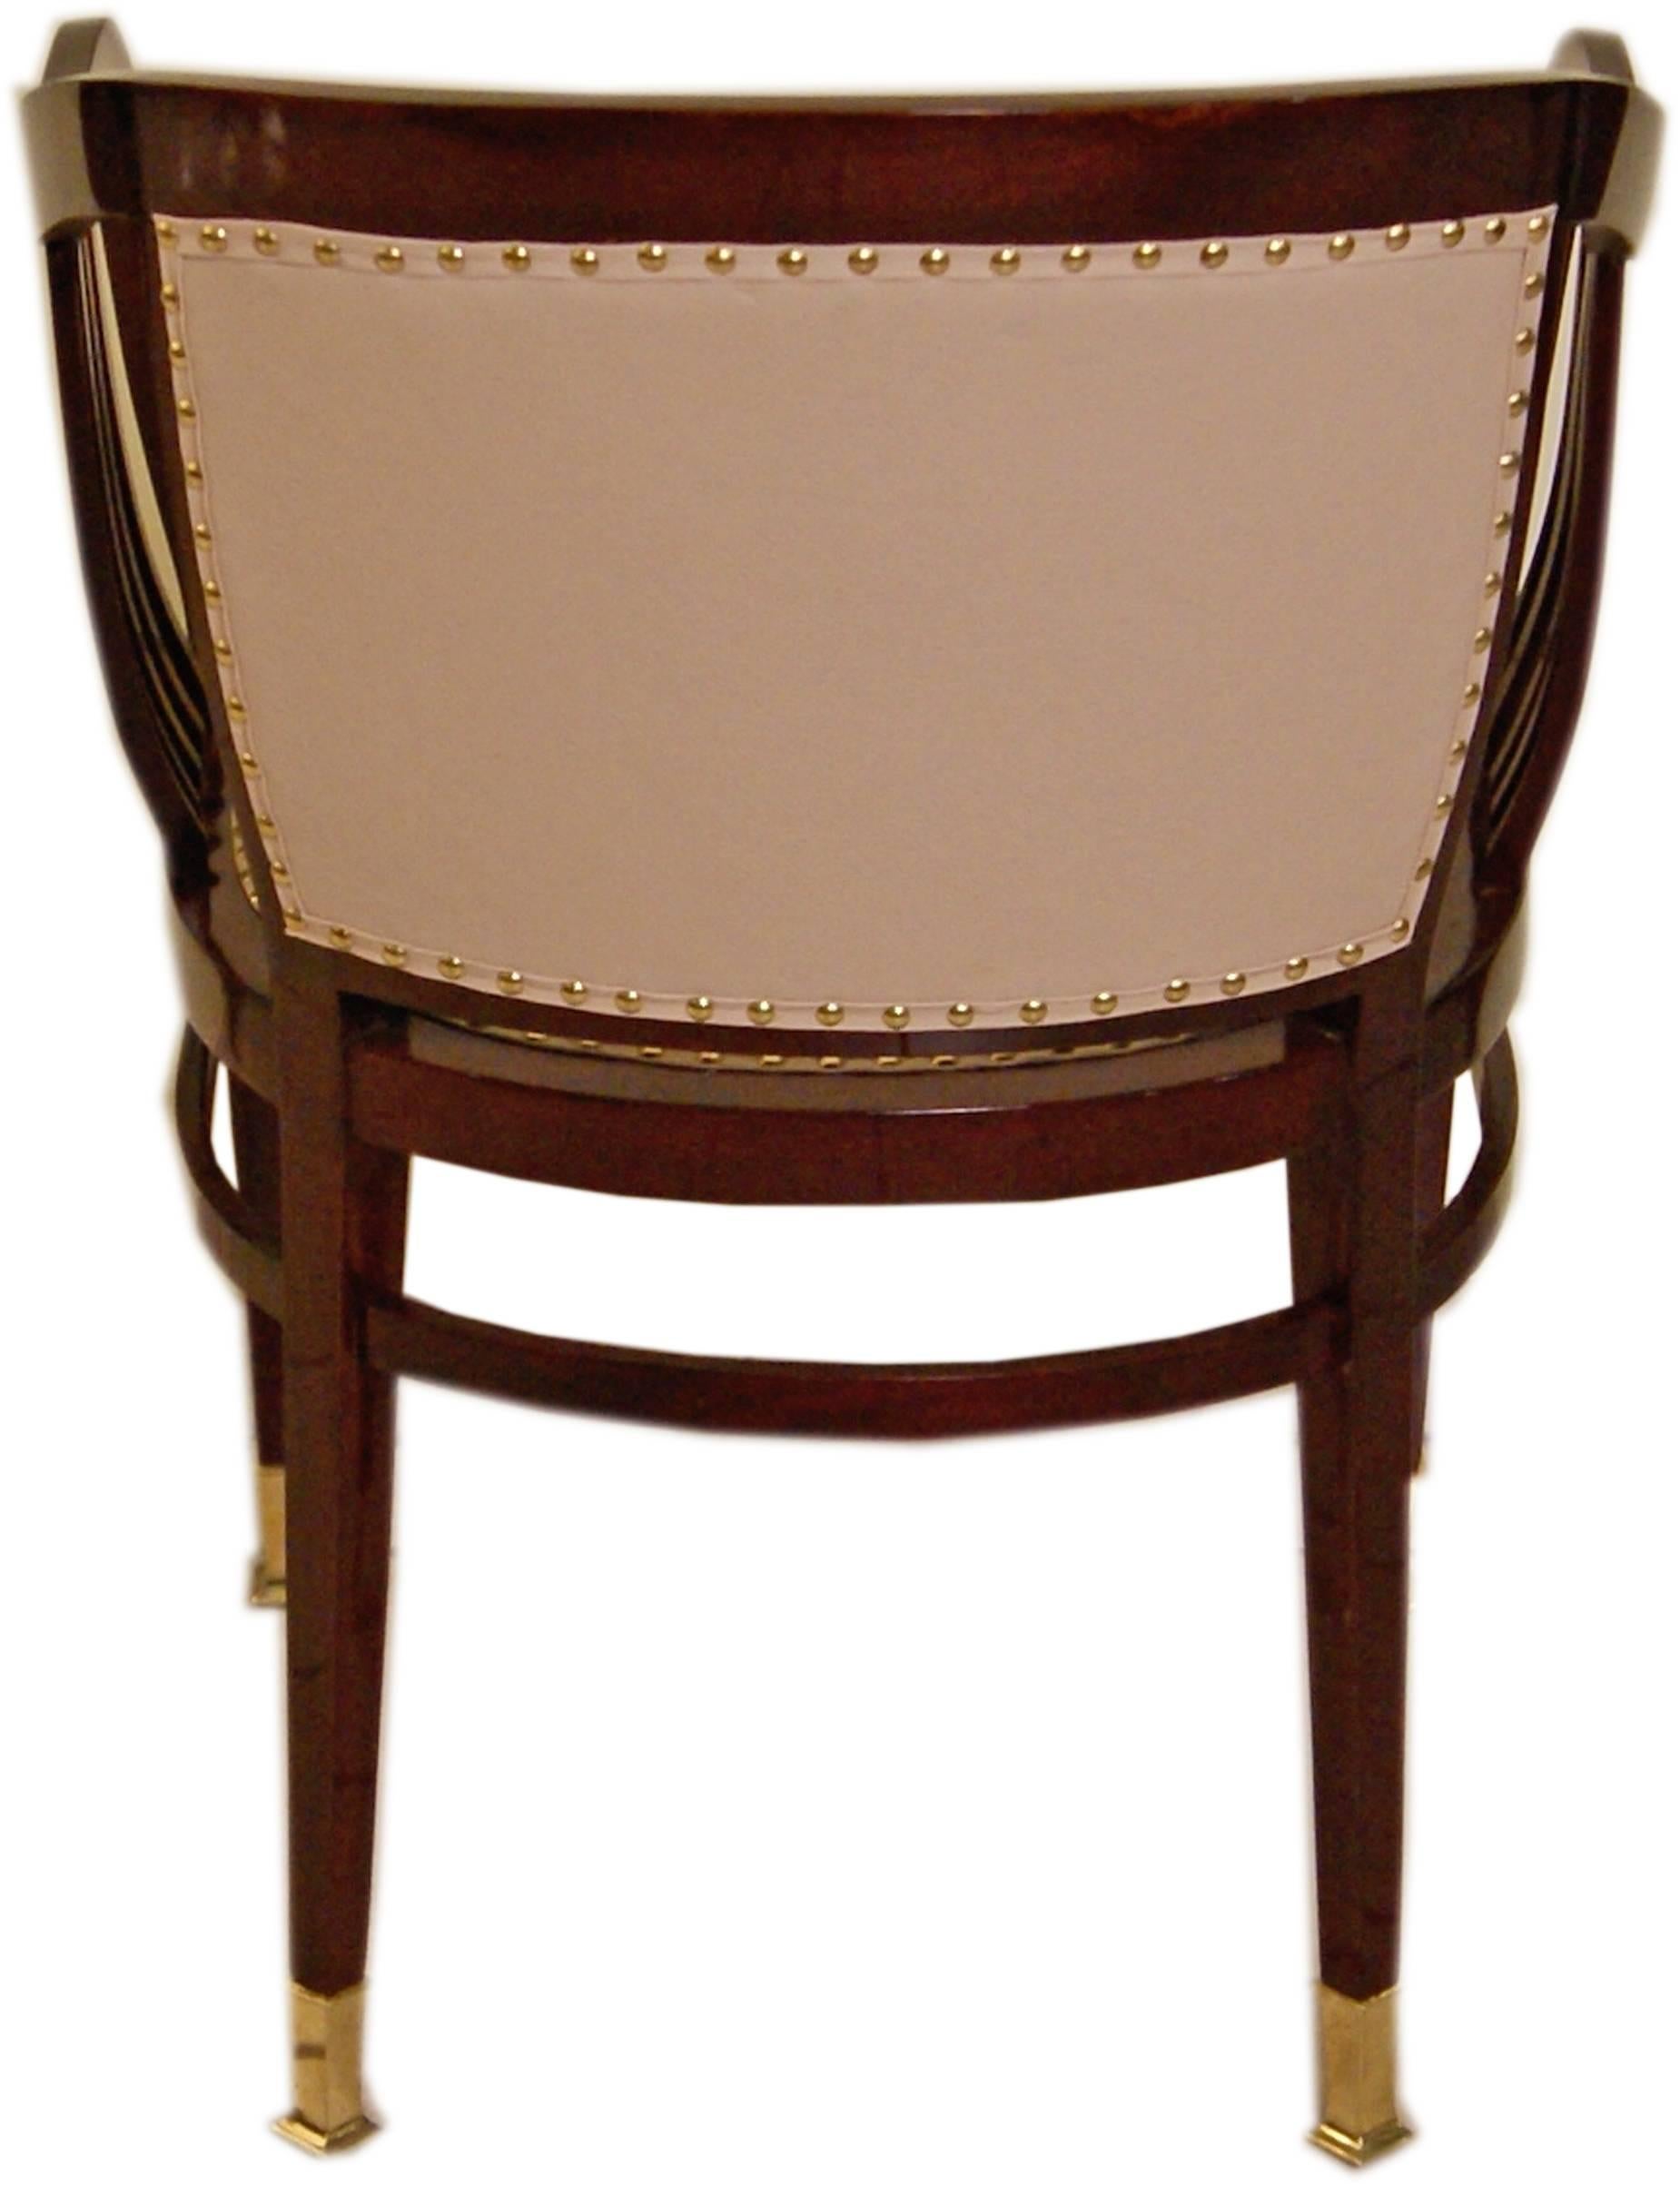 Art Nouveau most elegant armchair.

Finest manufacturing quality! 

Beechwood, mahogany stained, refurbished by hand

The seat as well as backrest are upholstered with elegant fawn (= beige-coloured) leather (restored). The armrests are